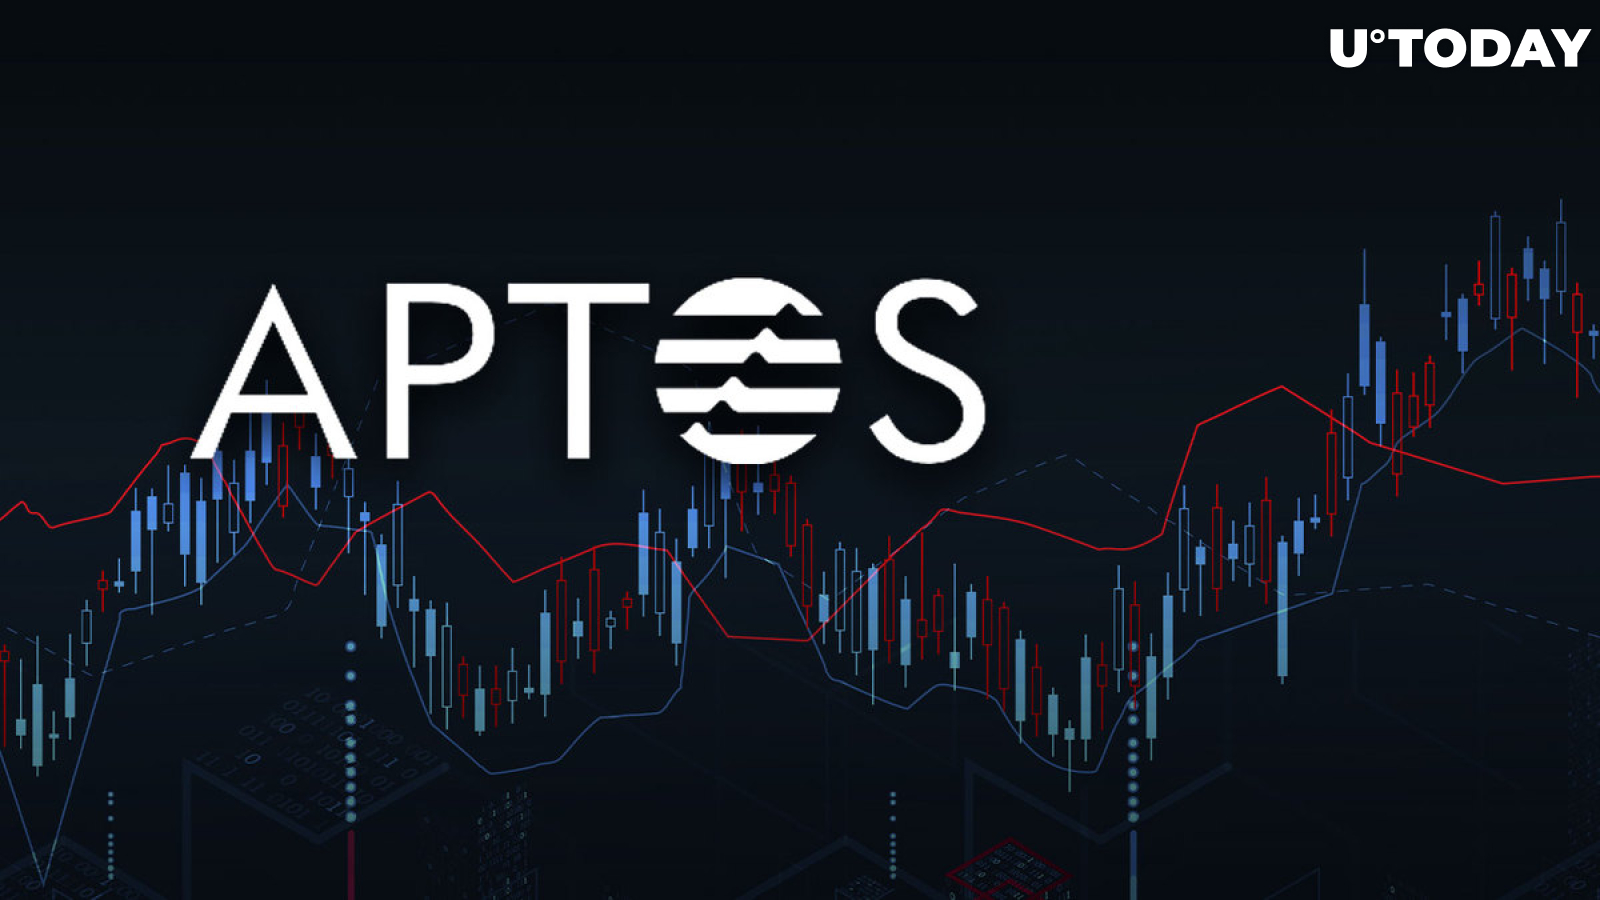 Aptos (APT) Is in 23% Recovery Following General Cryptocurrency Market Recovery